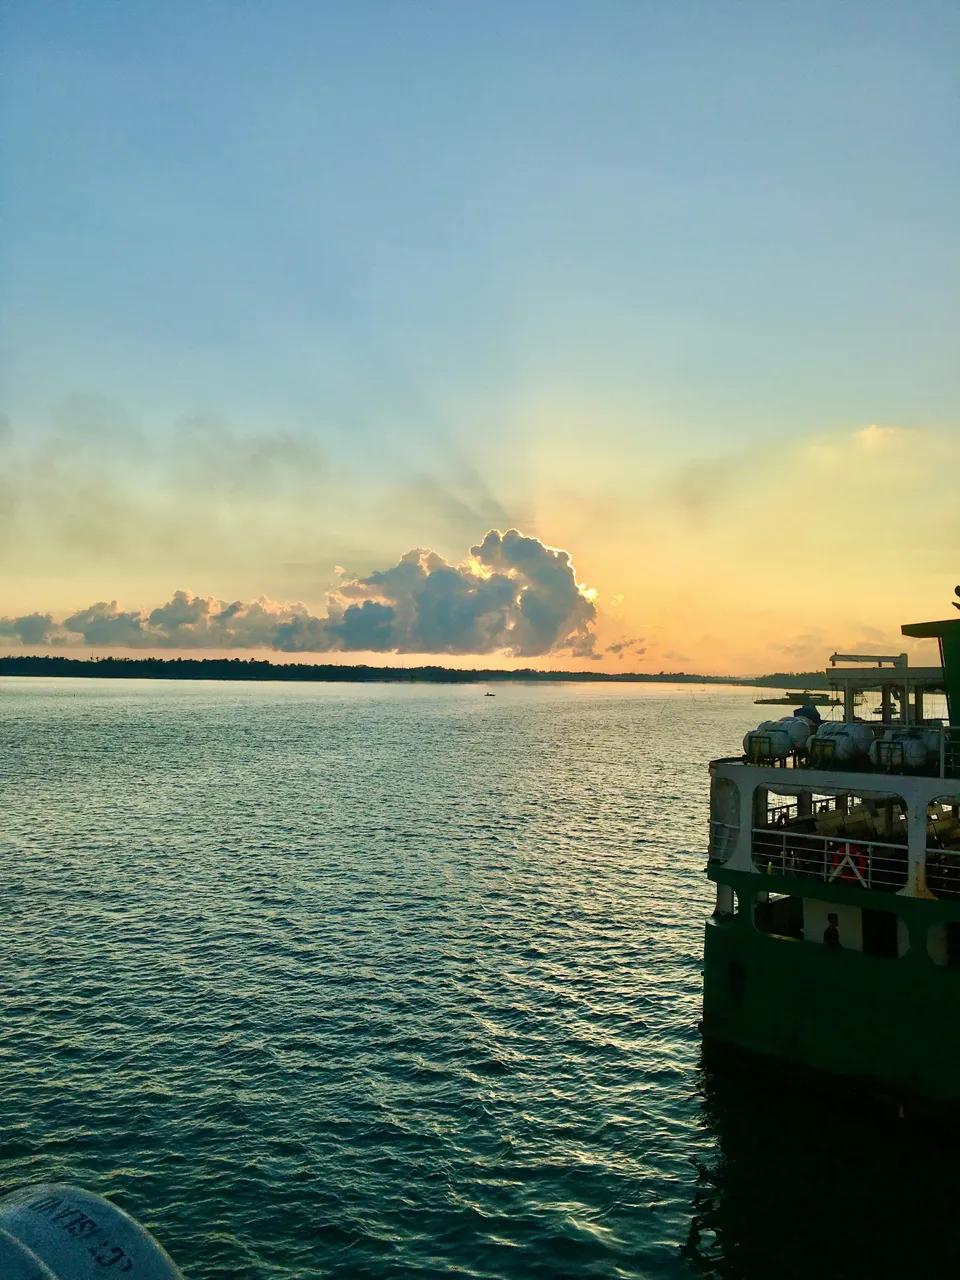 The view of the sunrise from the Super Shuttle Ferry